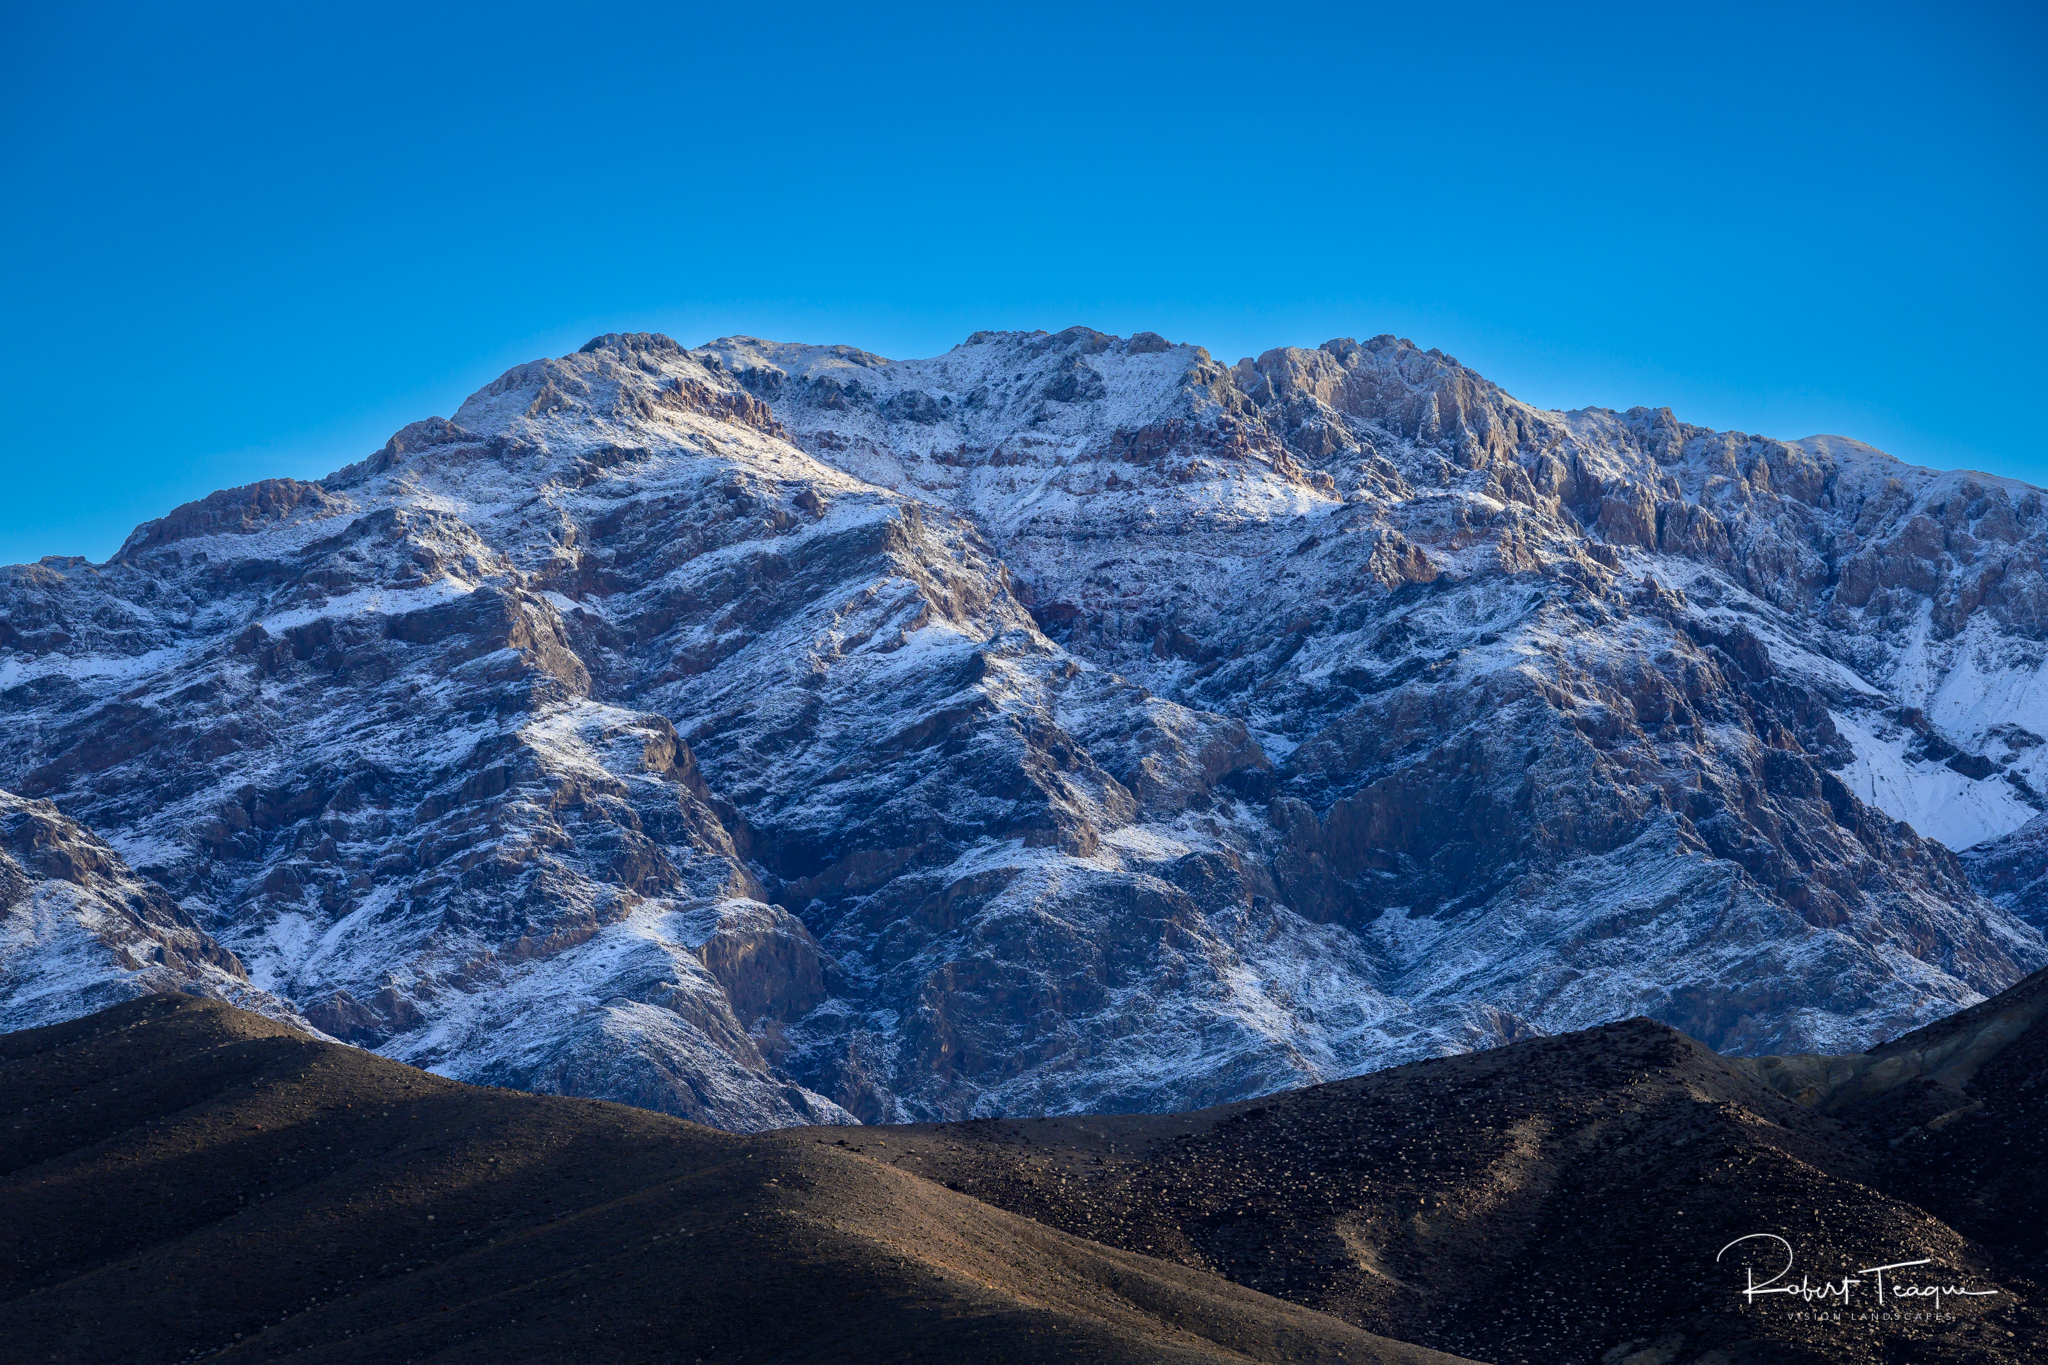 Early Morning at the Amargosa Range with a light dusting of snow (Nikon Z7)